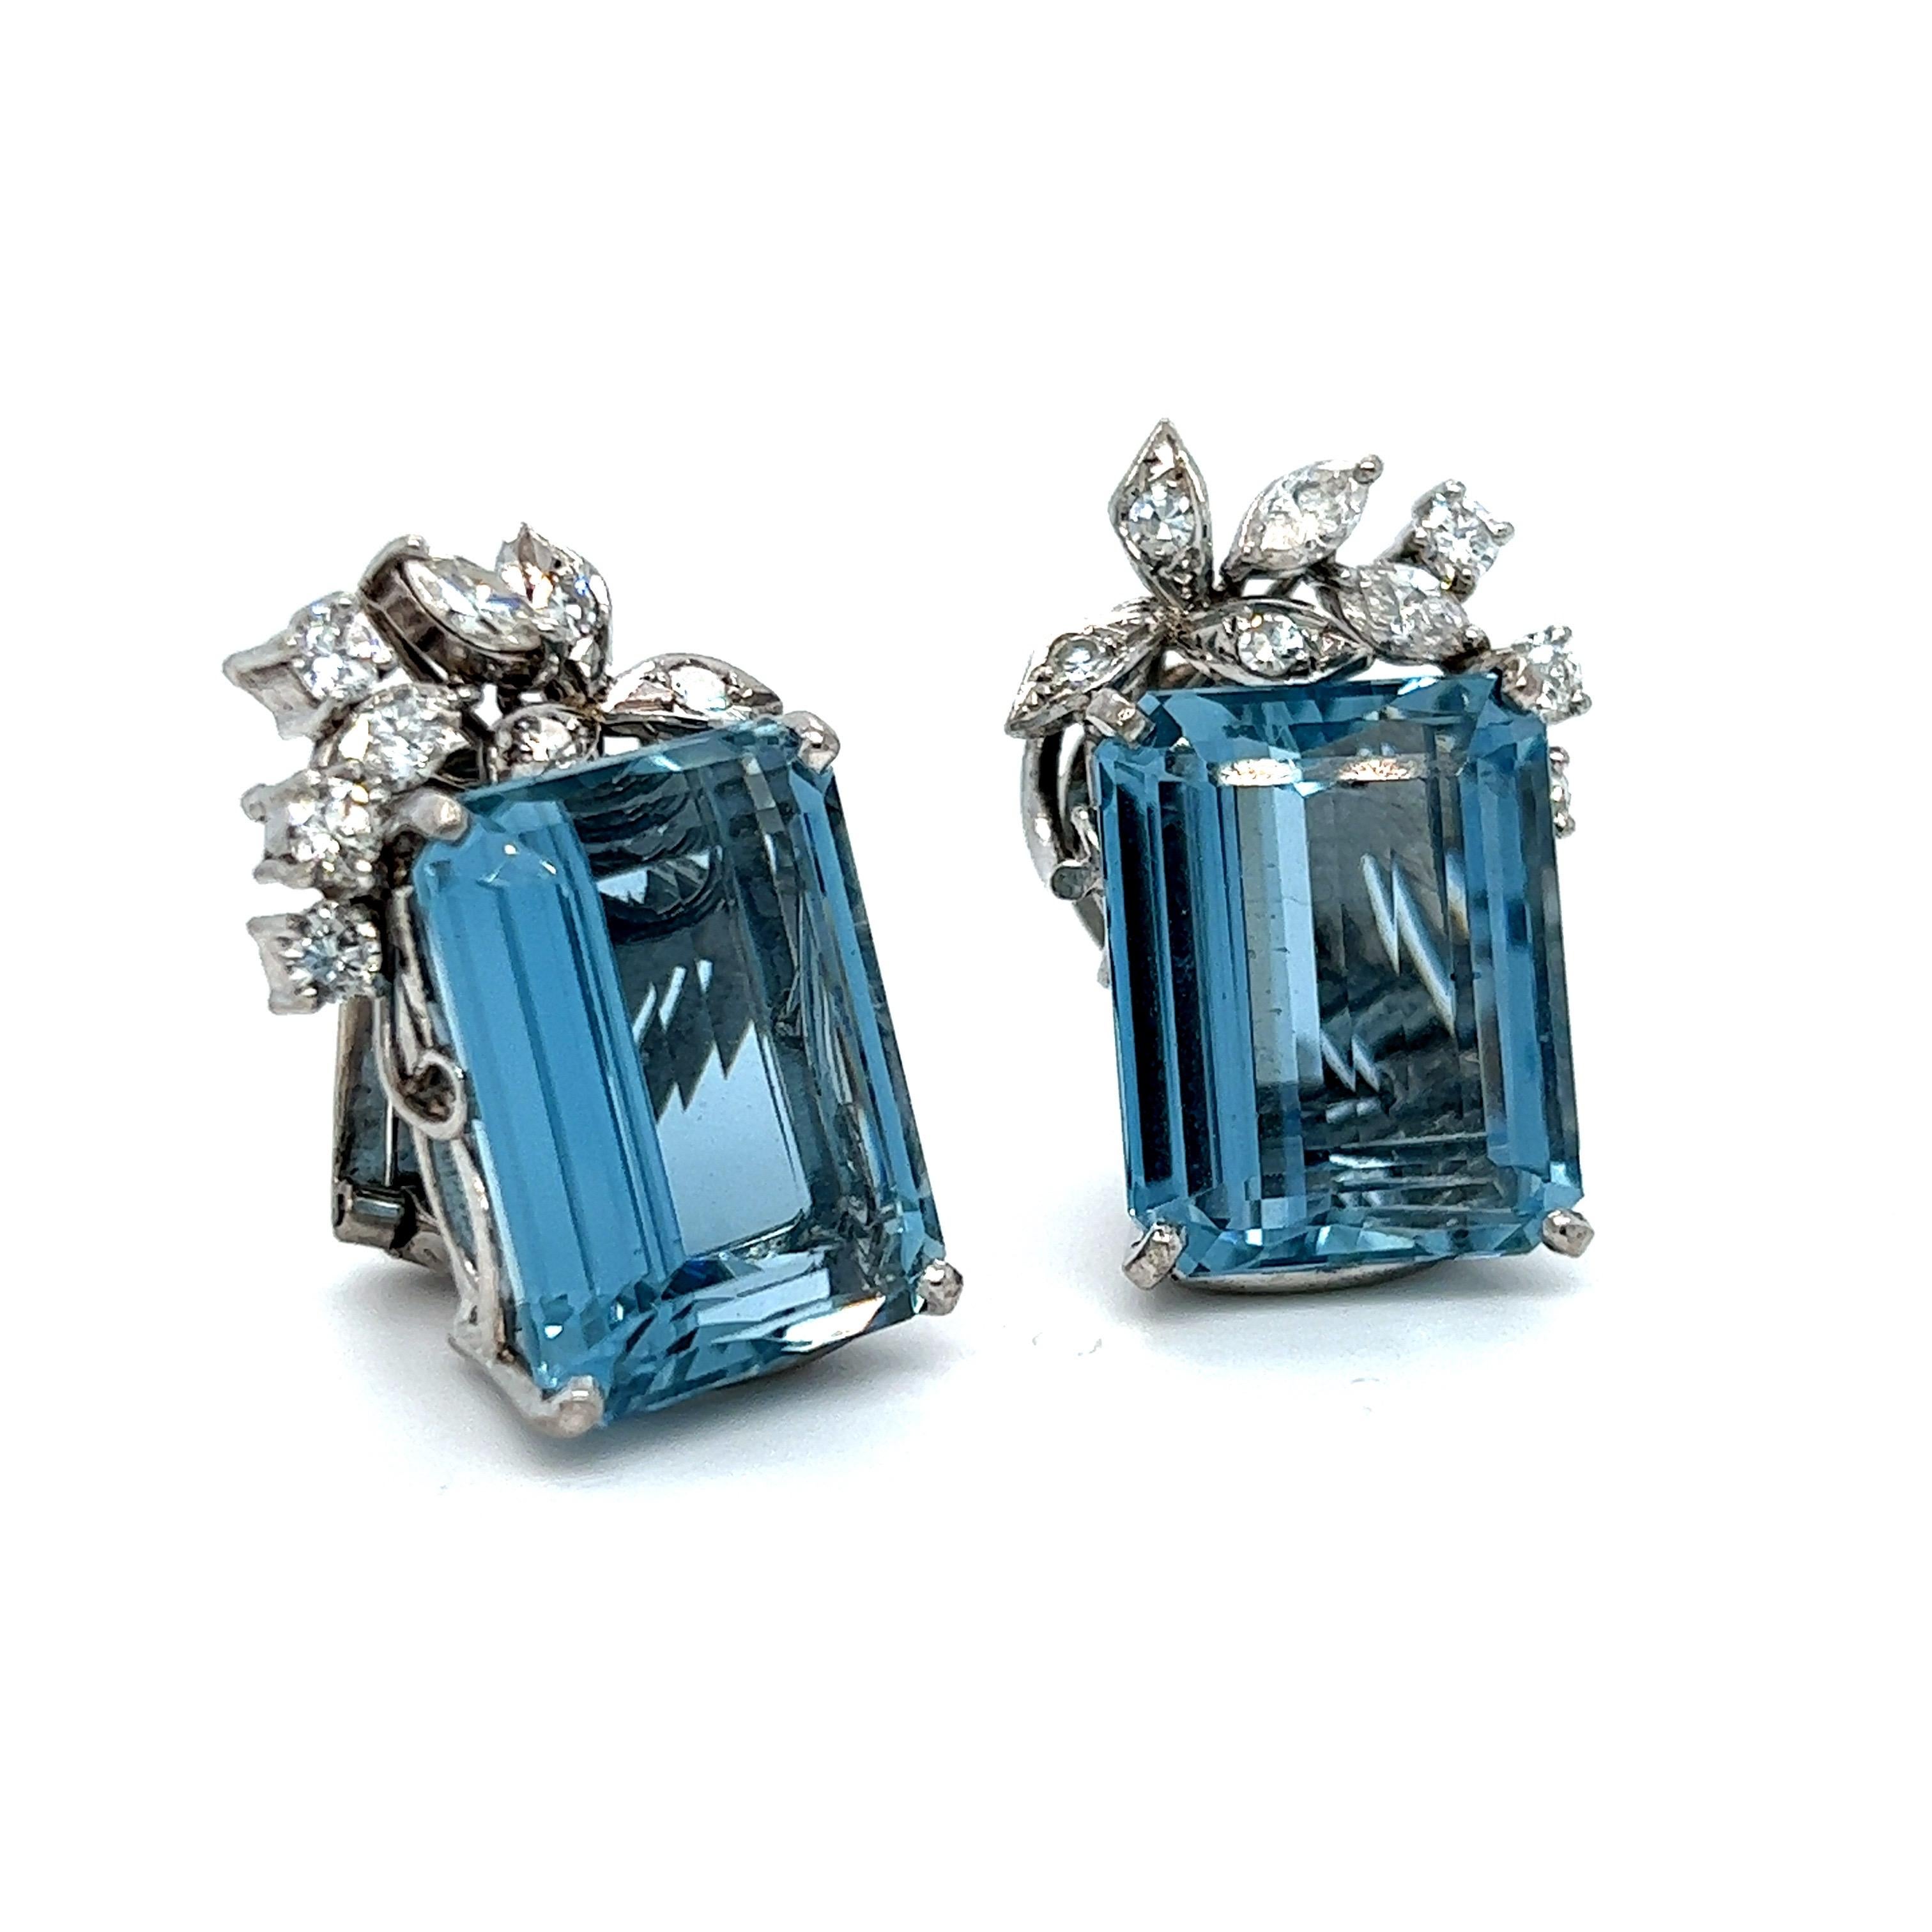 These Fantastic Retro Vintage 14K White Gold Blue Topaz Earrings with Diamond Accents are just spectacular. In all honestly, I thought the stones were Aquamarine. They look exactly like high quality aquamarine. Only extensive testing revealed they